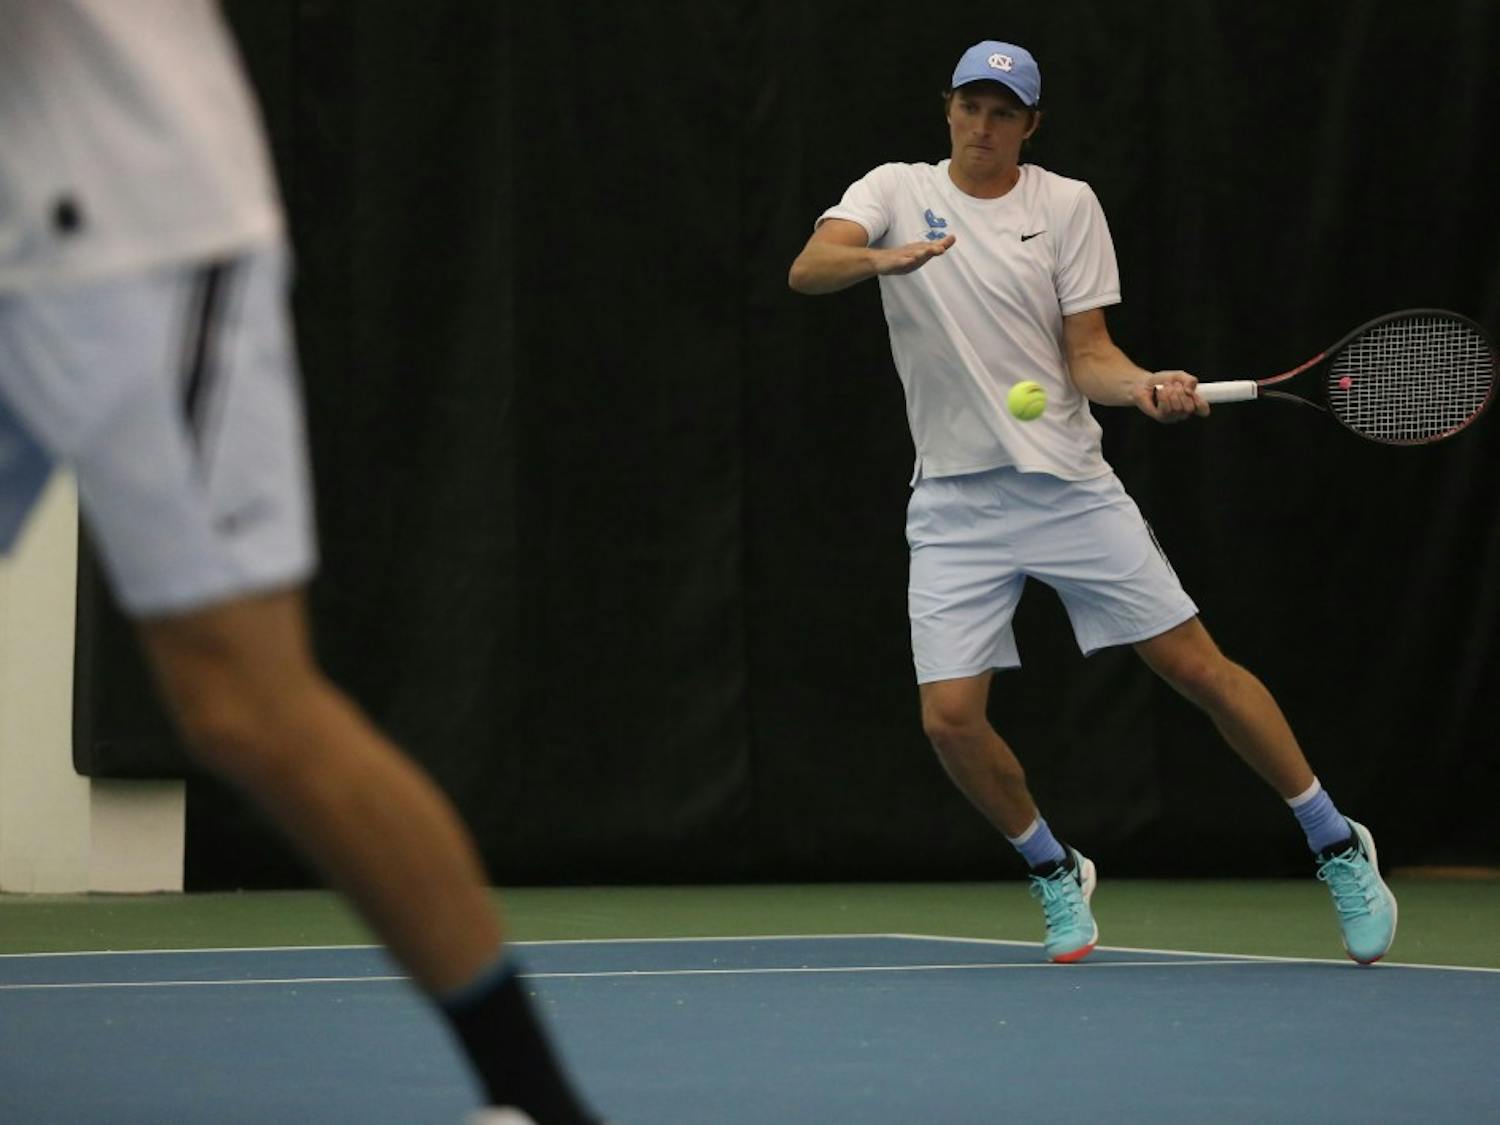 UNC men's tennis first-year Brian Cernoch returns the ball during a doubles match against Boston College on Friday April 5, 2019. UNC defeated Boston College 5-1.